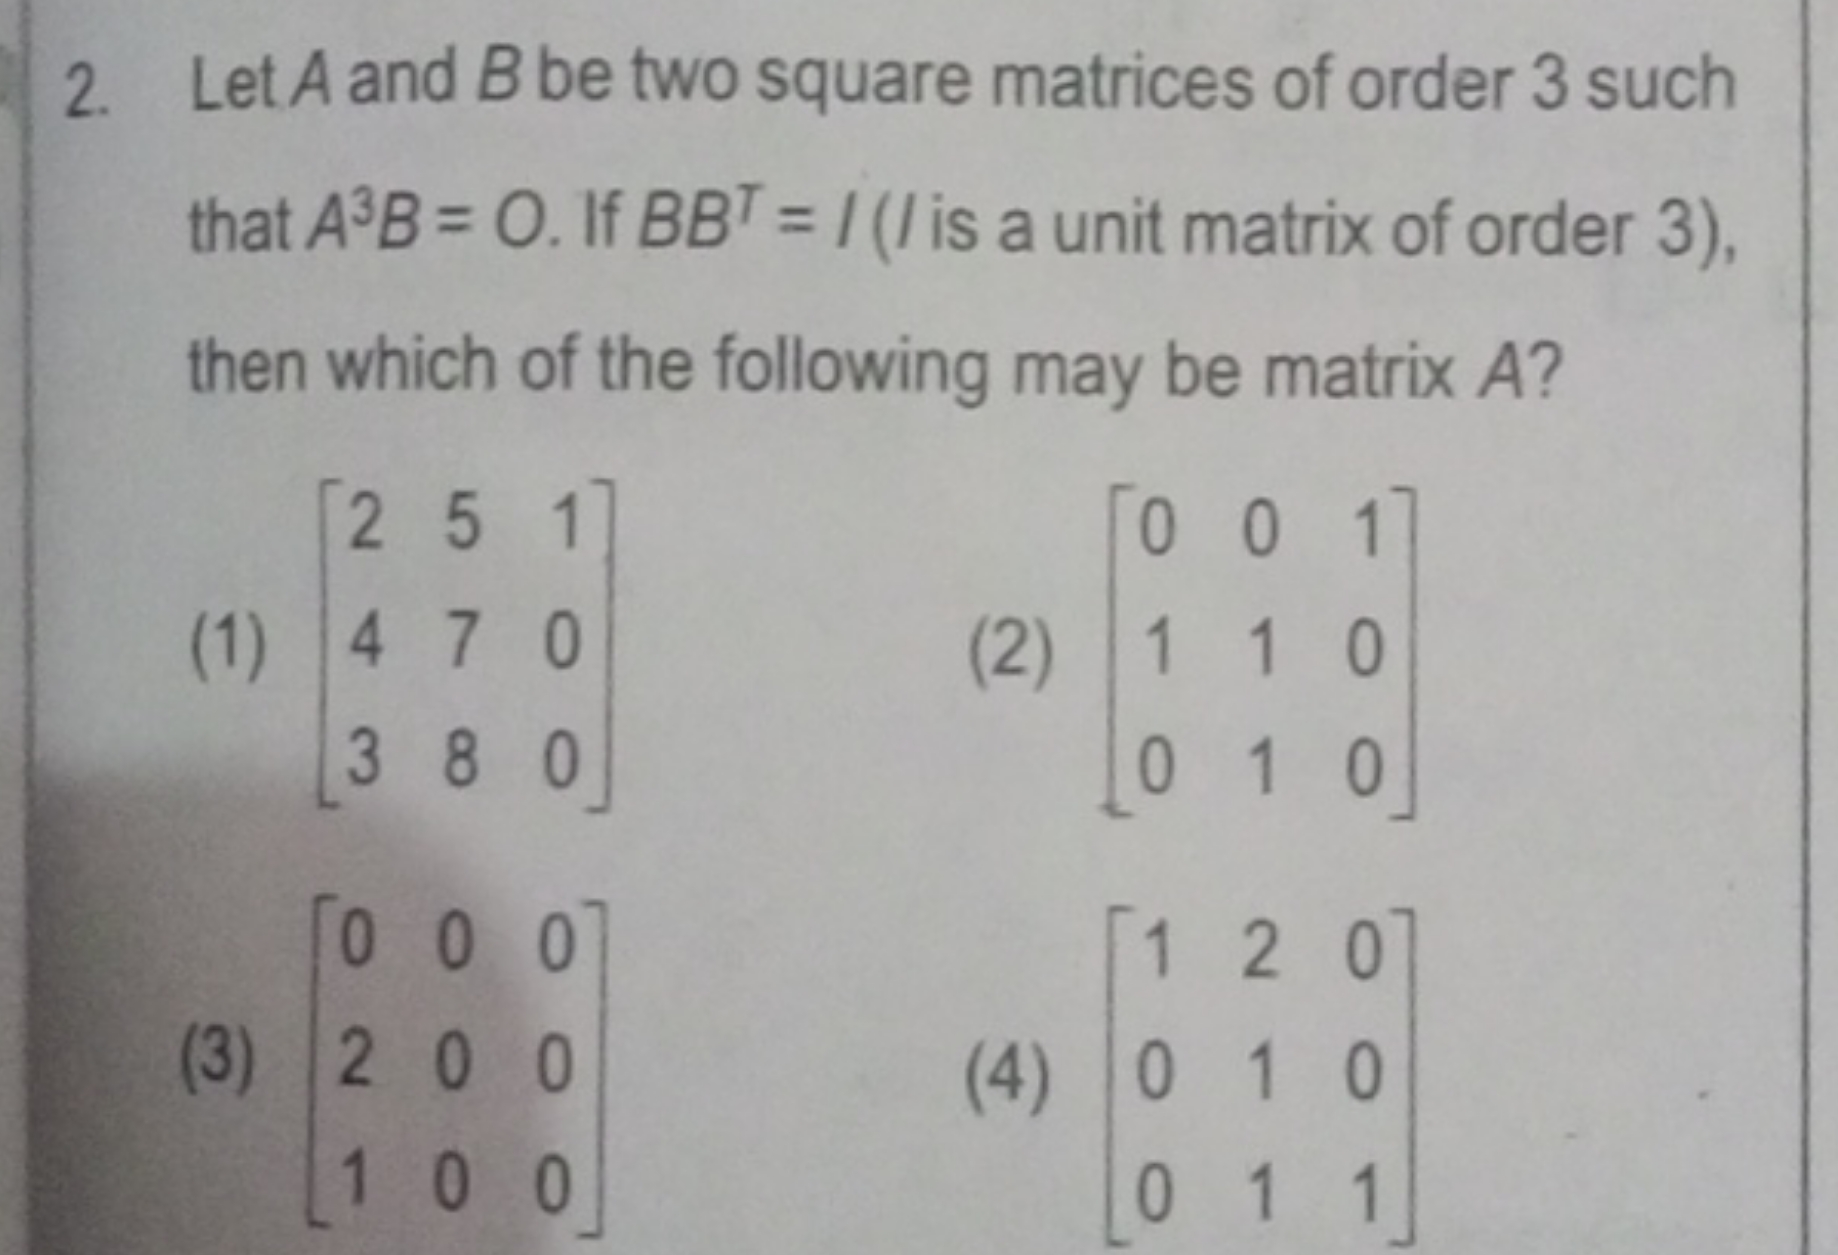 Let A and B be two square matrices of order 3 such that A3B=0. If BBT=